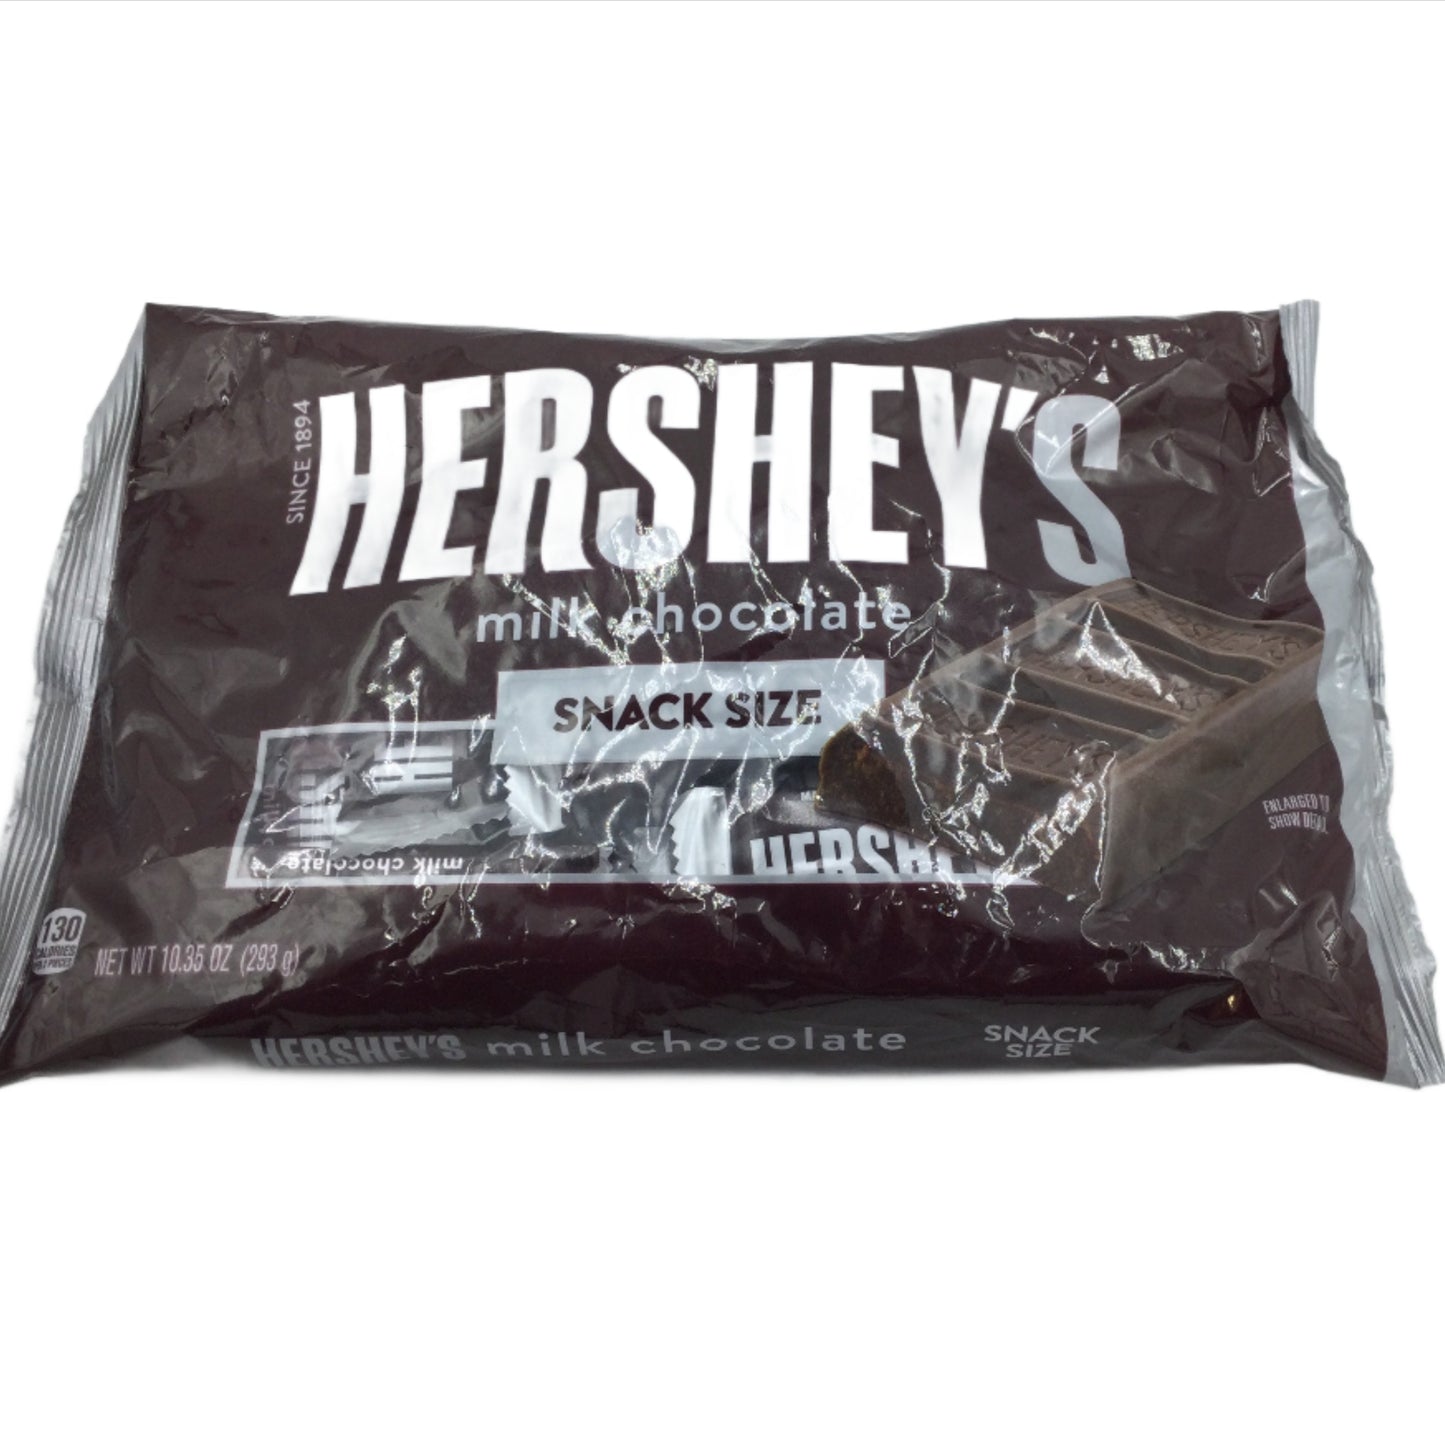 Hershey's Milk Chocolate Snack Size Candy Bars- 10.35 oz bag – GiveNKind